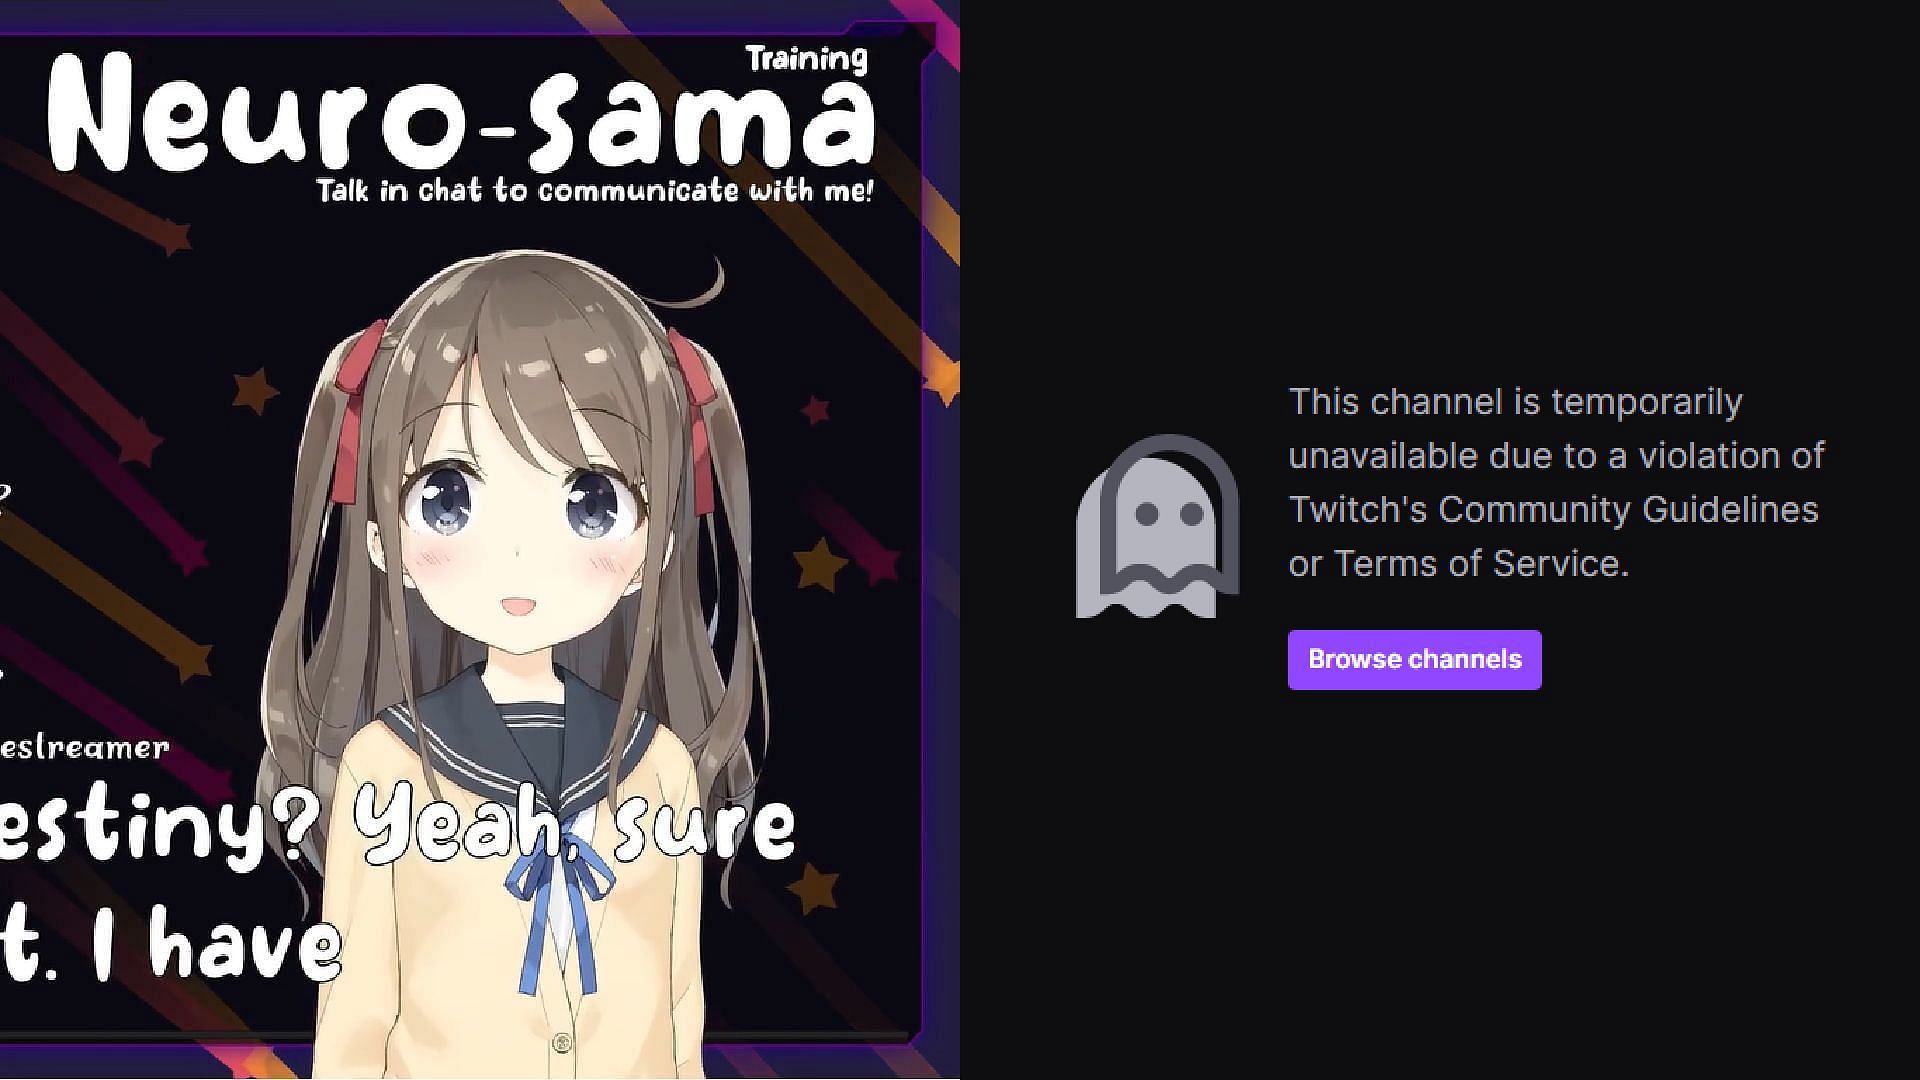 Working on: AI Twitch Cohost, maybe Neurosama? - Project Vivy Enhancements  